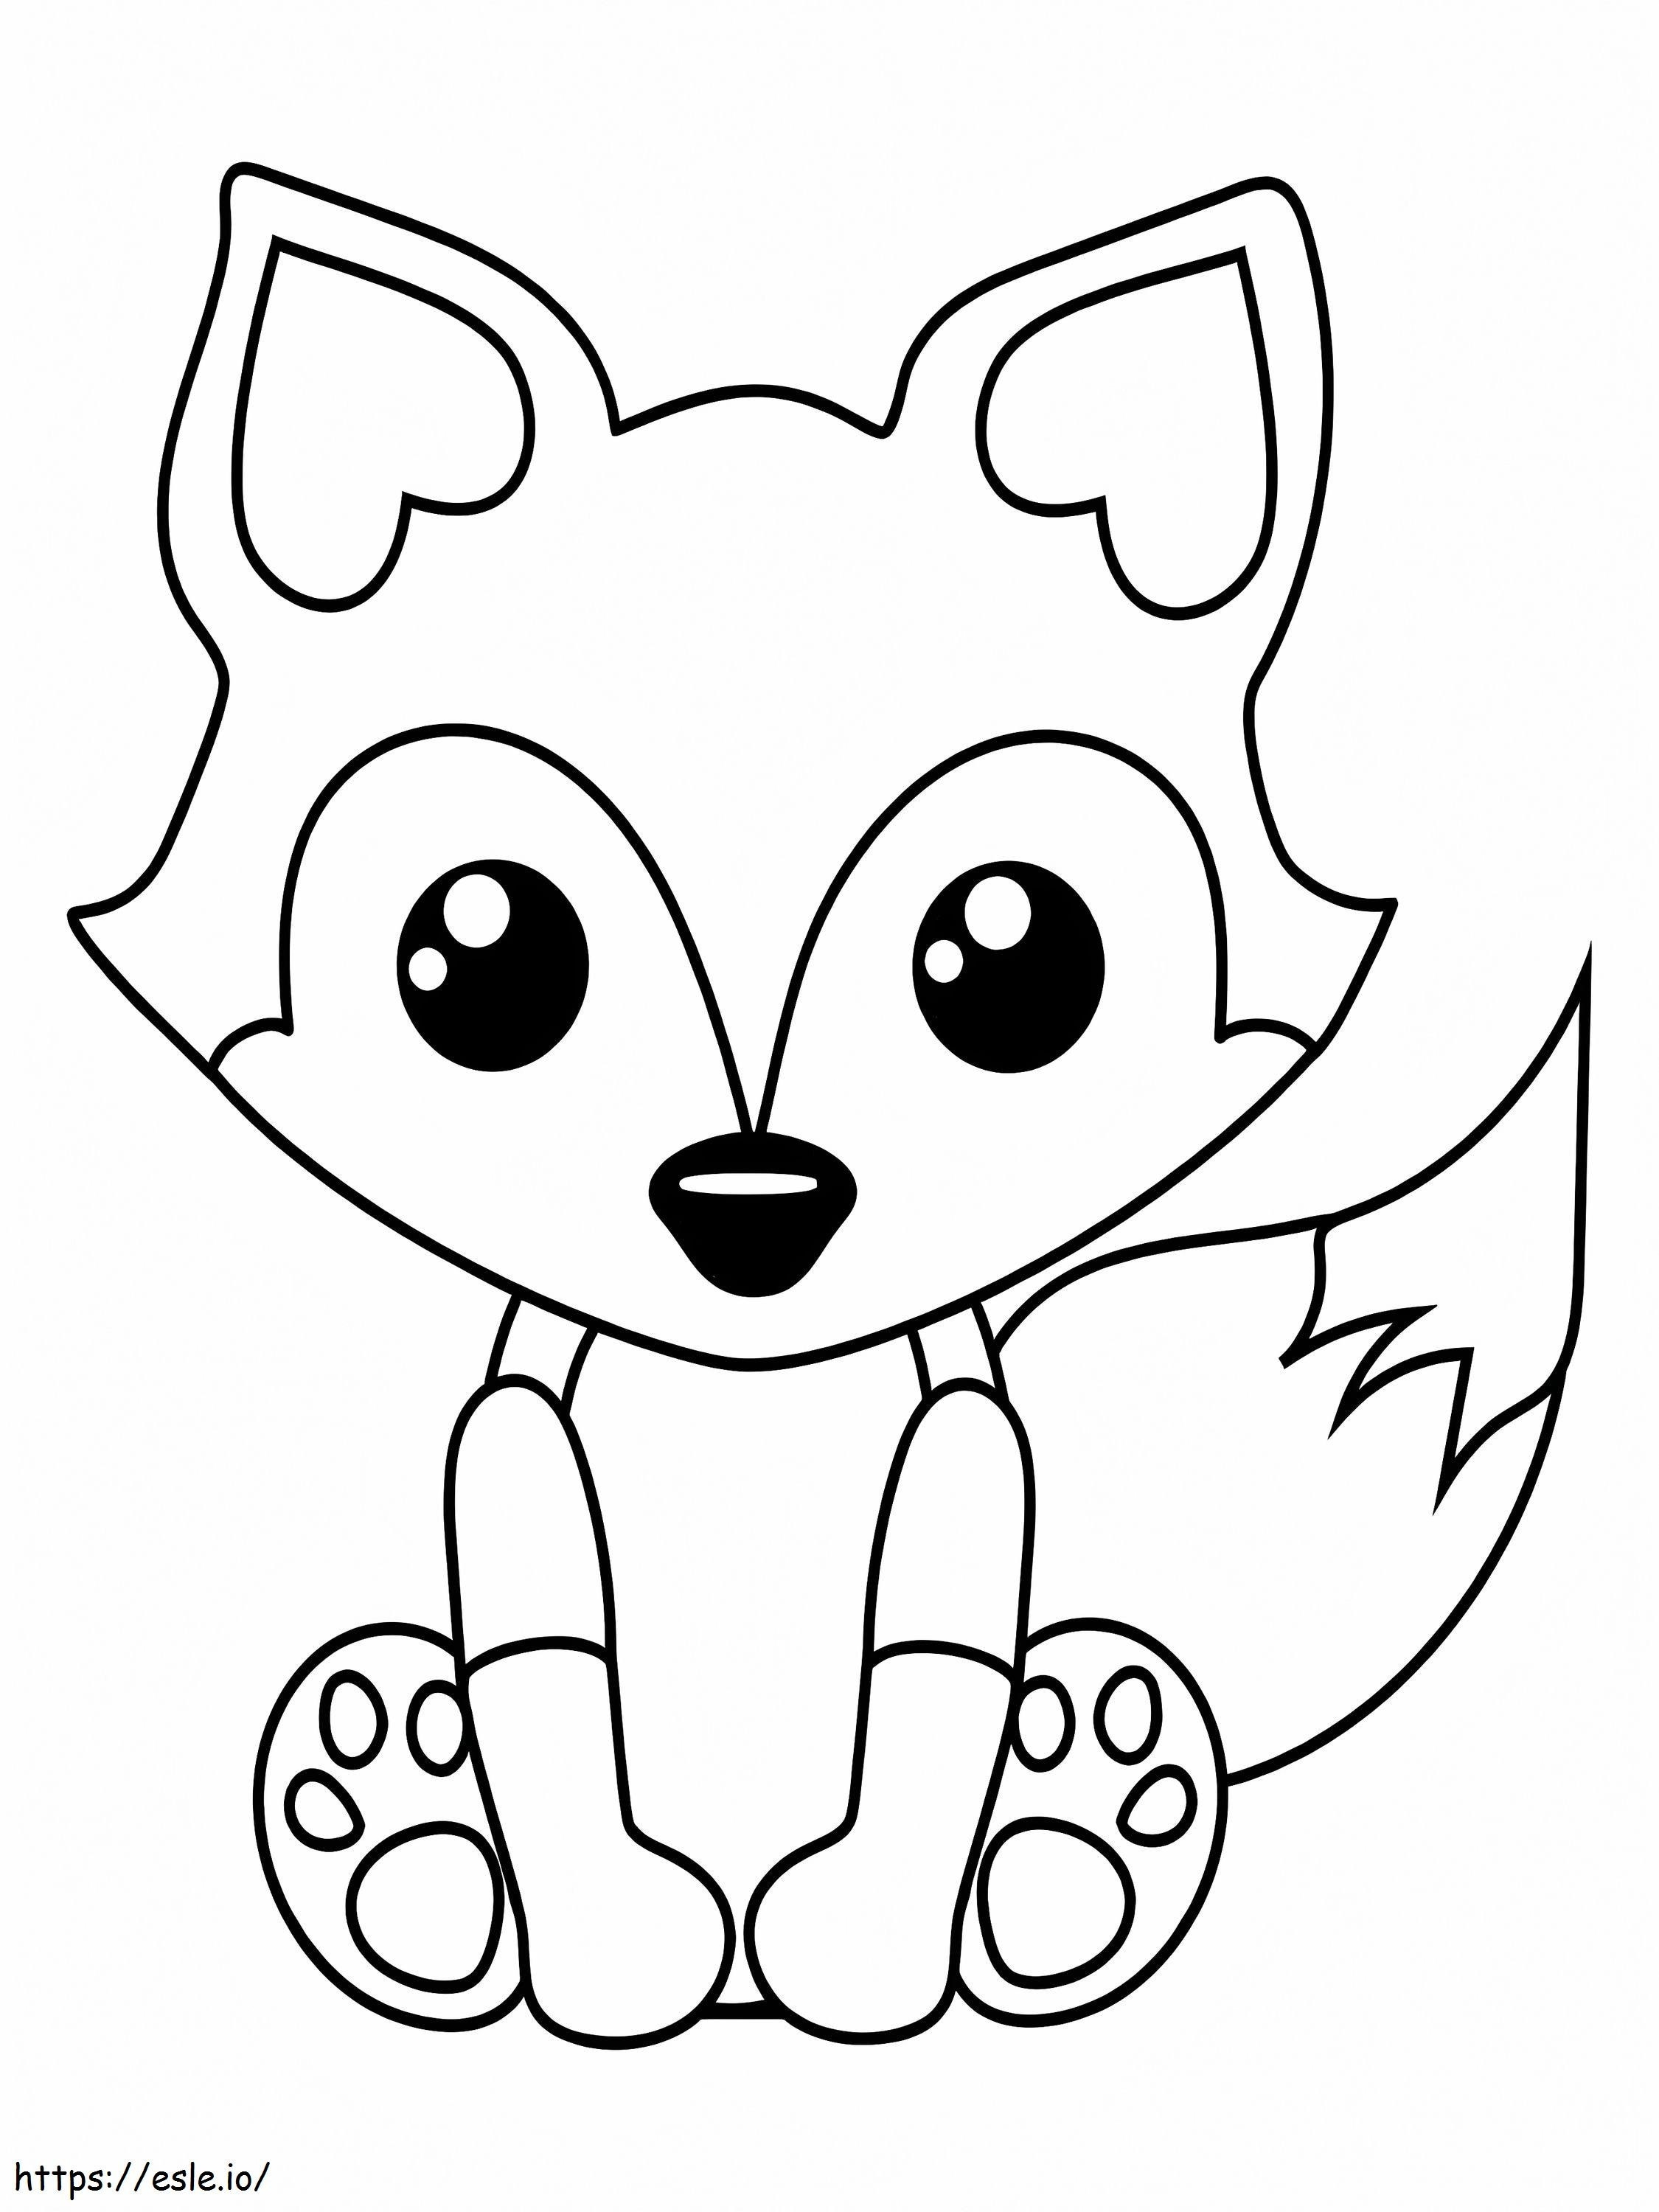 Cute Fox Sitting coloring page